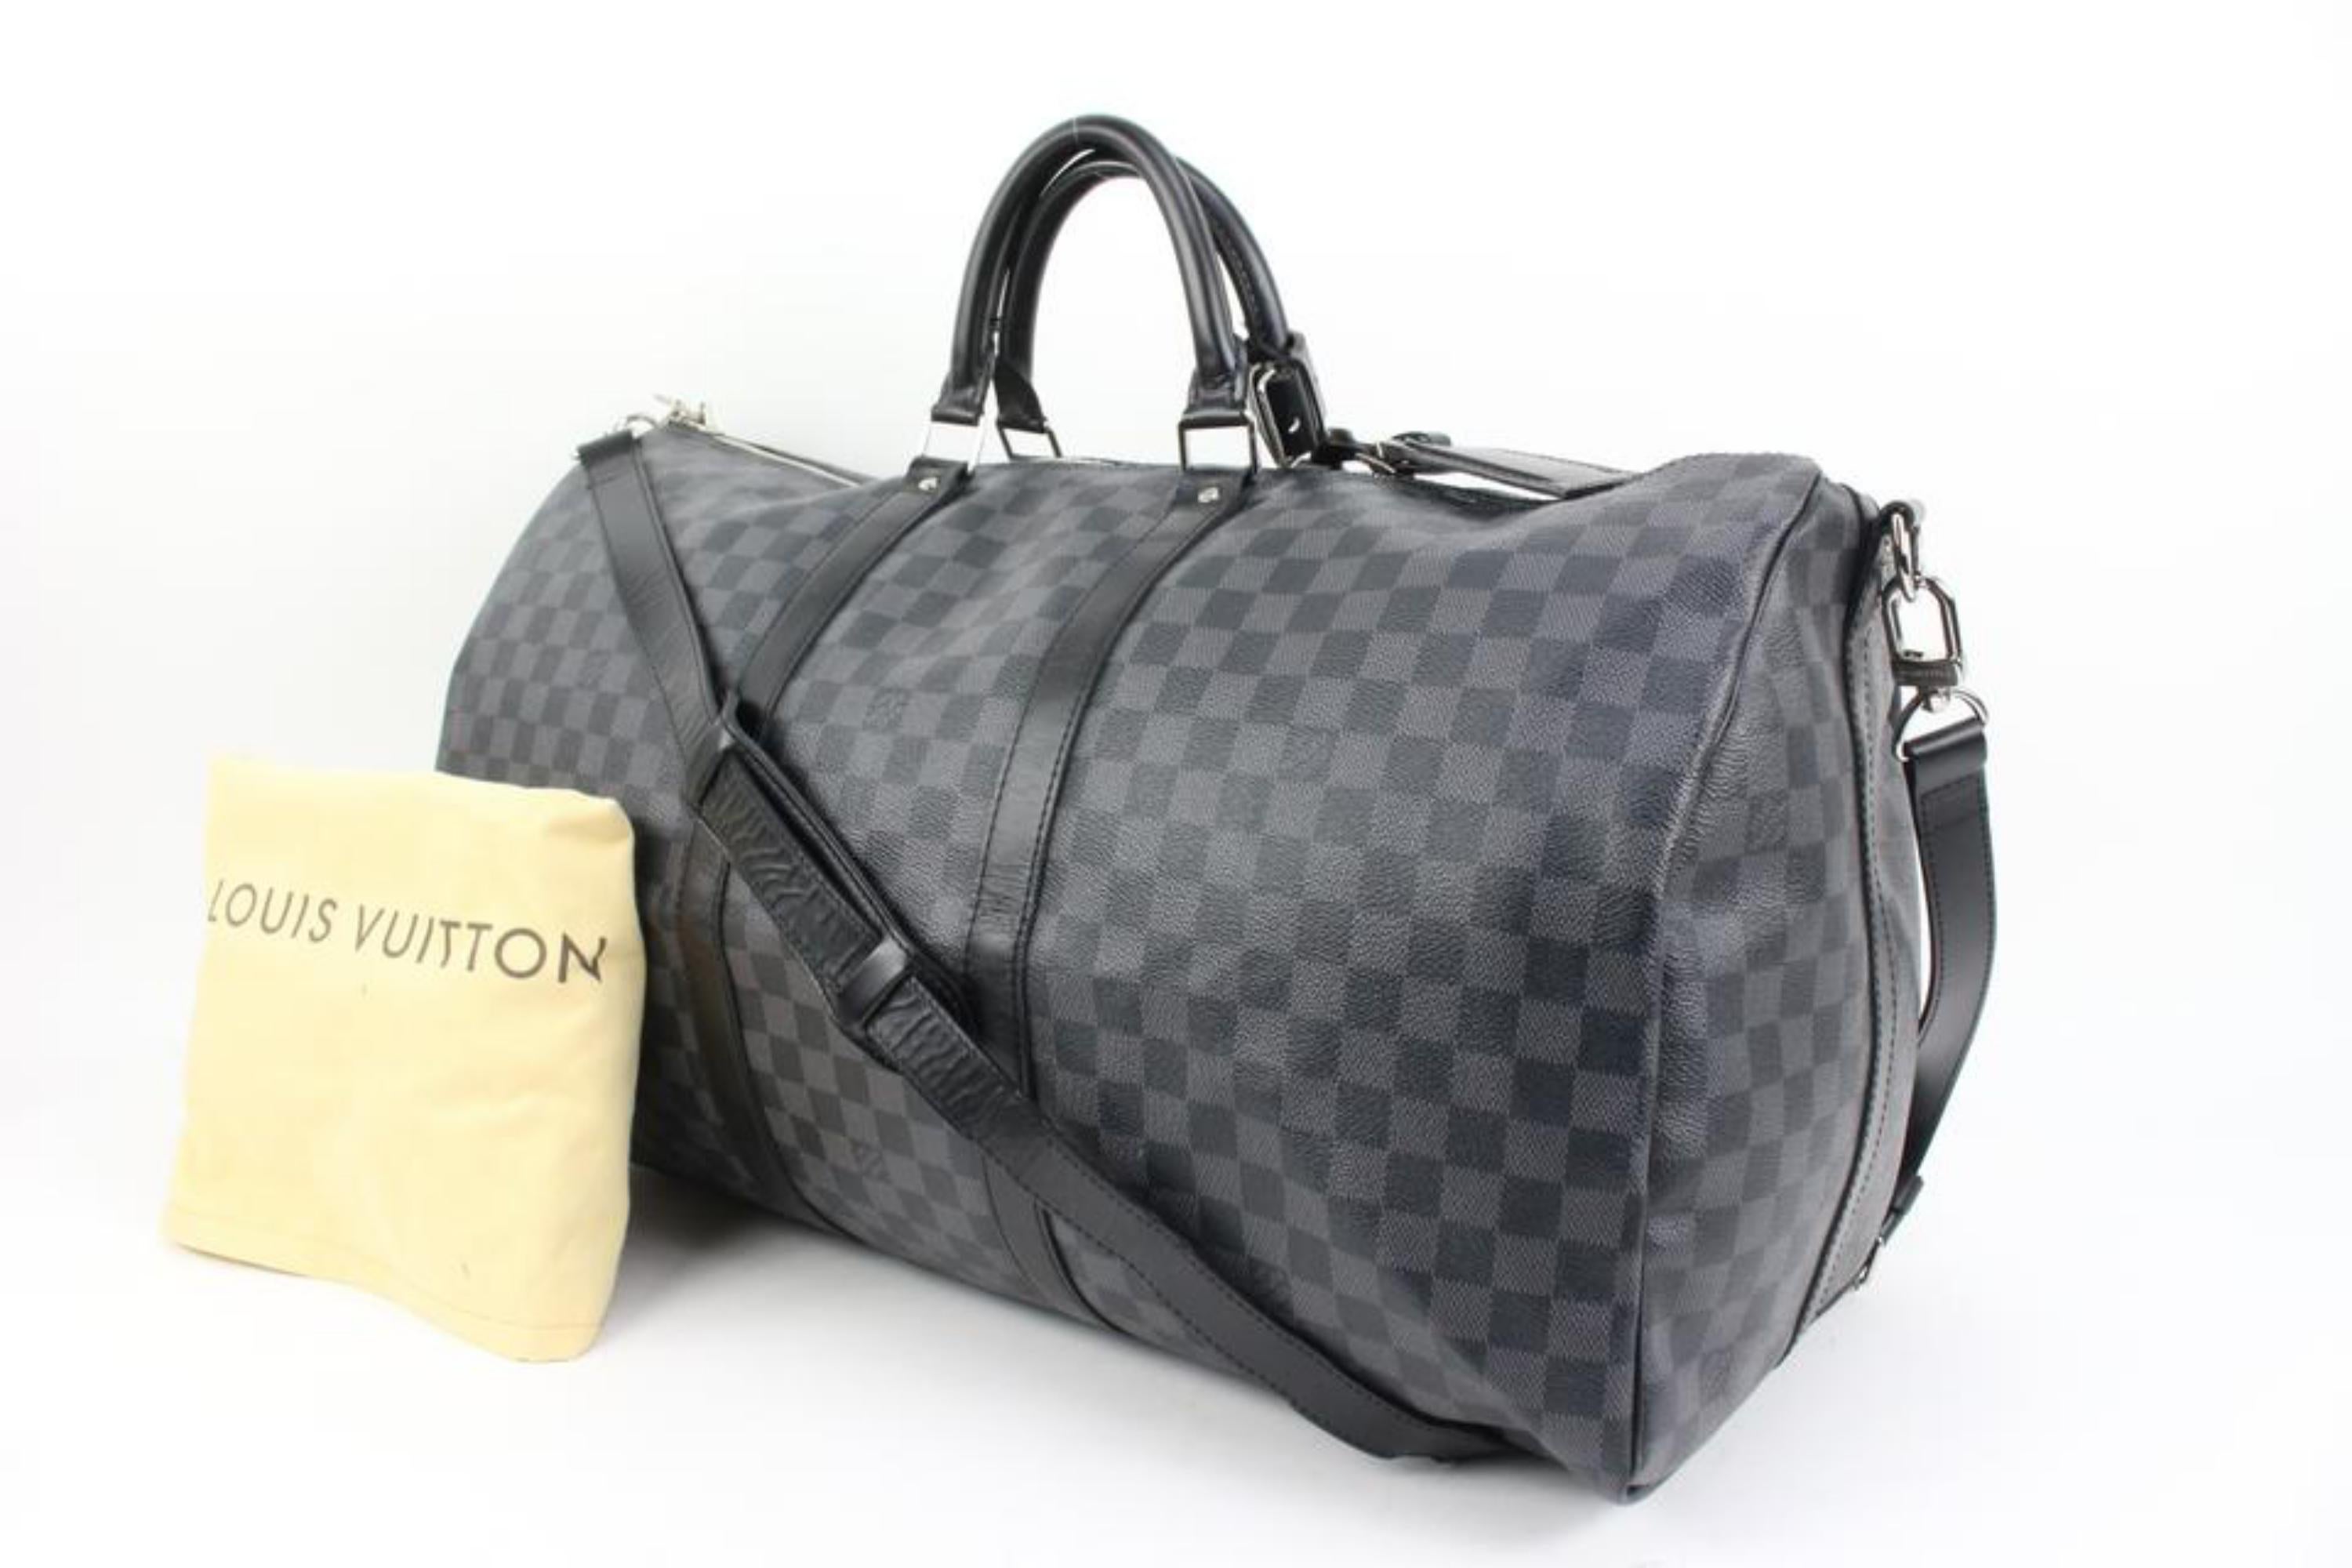 Louis Vuitton Damier Graphite Keepall Bandouliere 55 Duffle with Strap 41lk77
Date Code/Serial Number: MB4098
Made In: France
Measurements: Length:  21.5